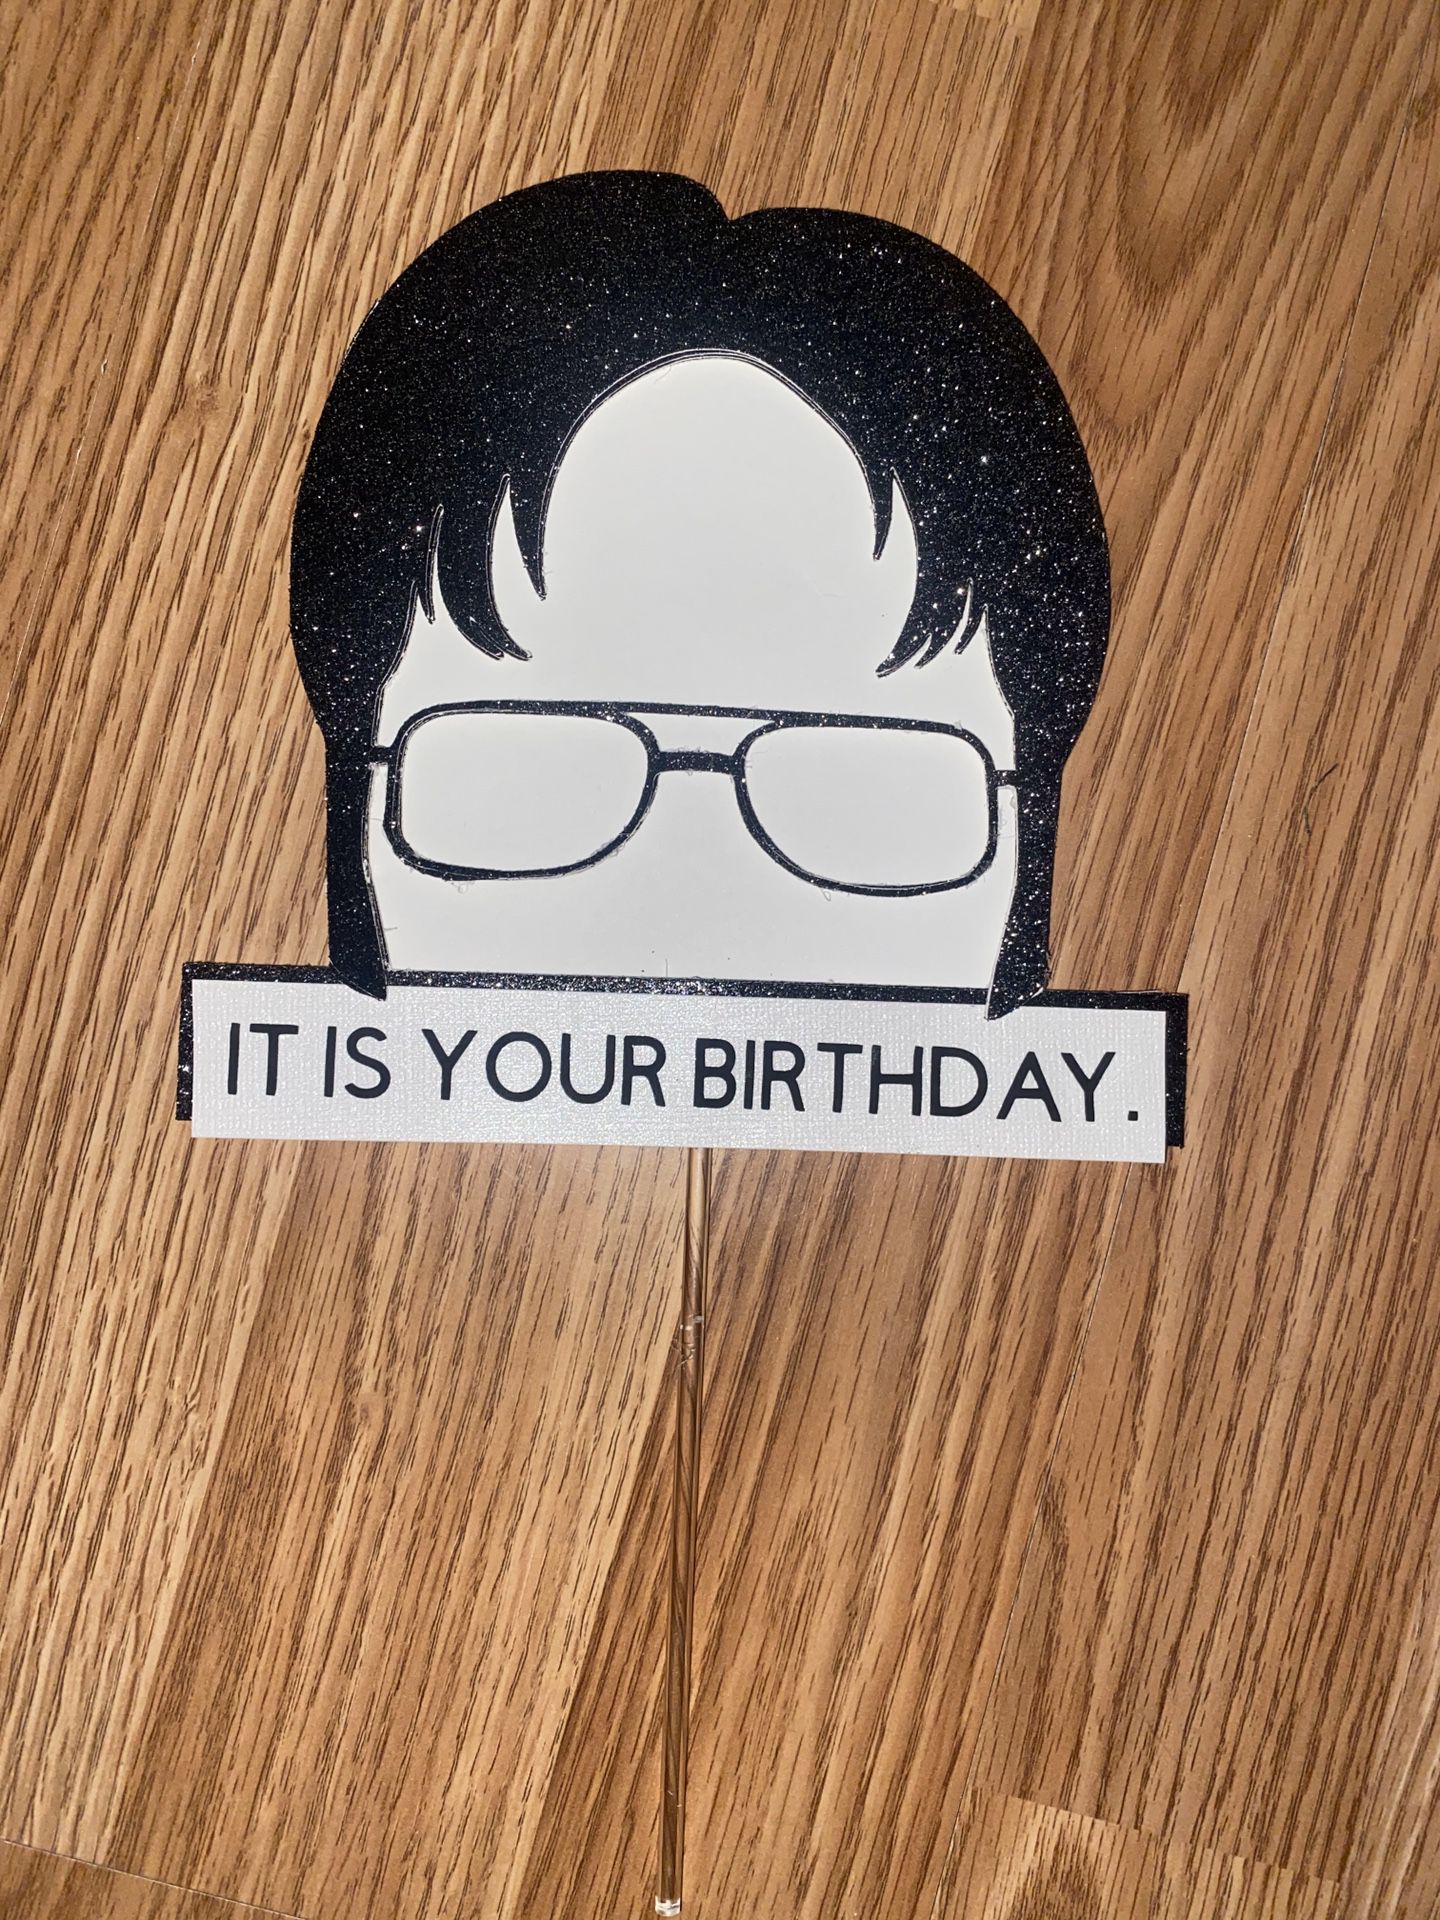 Dwight Schrute / The Office cake topper